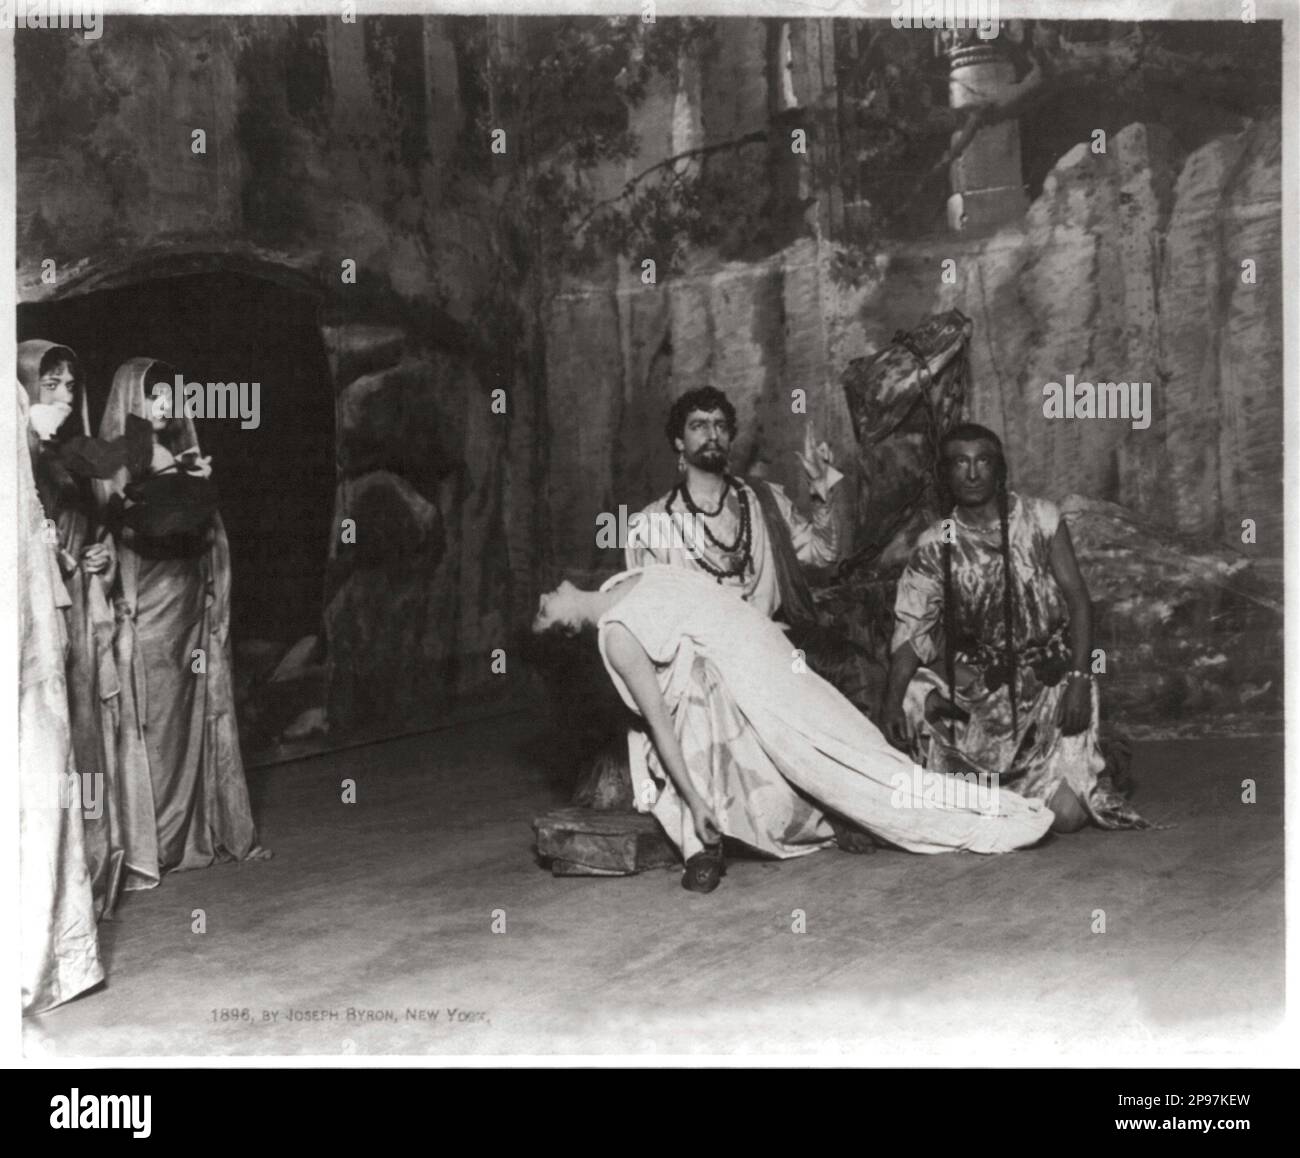 1896 , New York , USA : The french most celebrated theatre actress SARAH BERNHARDT ( 1844 - 1923 ) in  IZEYL by dramatist Eugene Morand and Armand Silvestre . Photo by Joseph Byron , New York - attrice - TEATRO - THEATRE - THEATER - DIVA - DIVINA - VAMP  - BELLE EPOQUE  - scena - scenografia ----   Archivio GBB Stock Photo